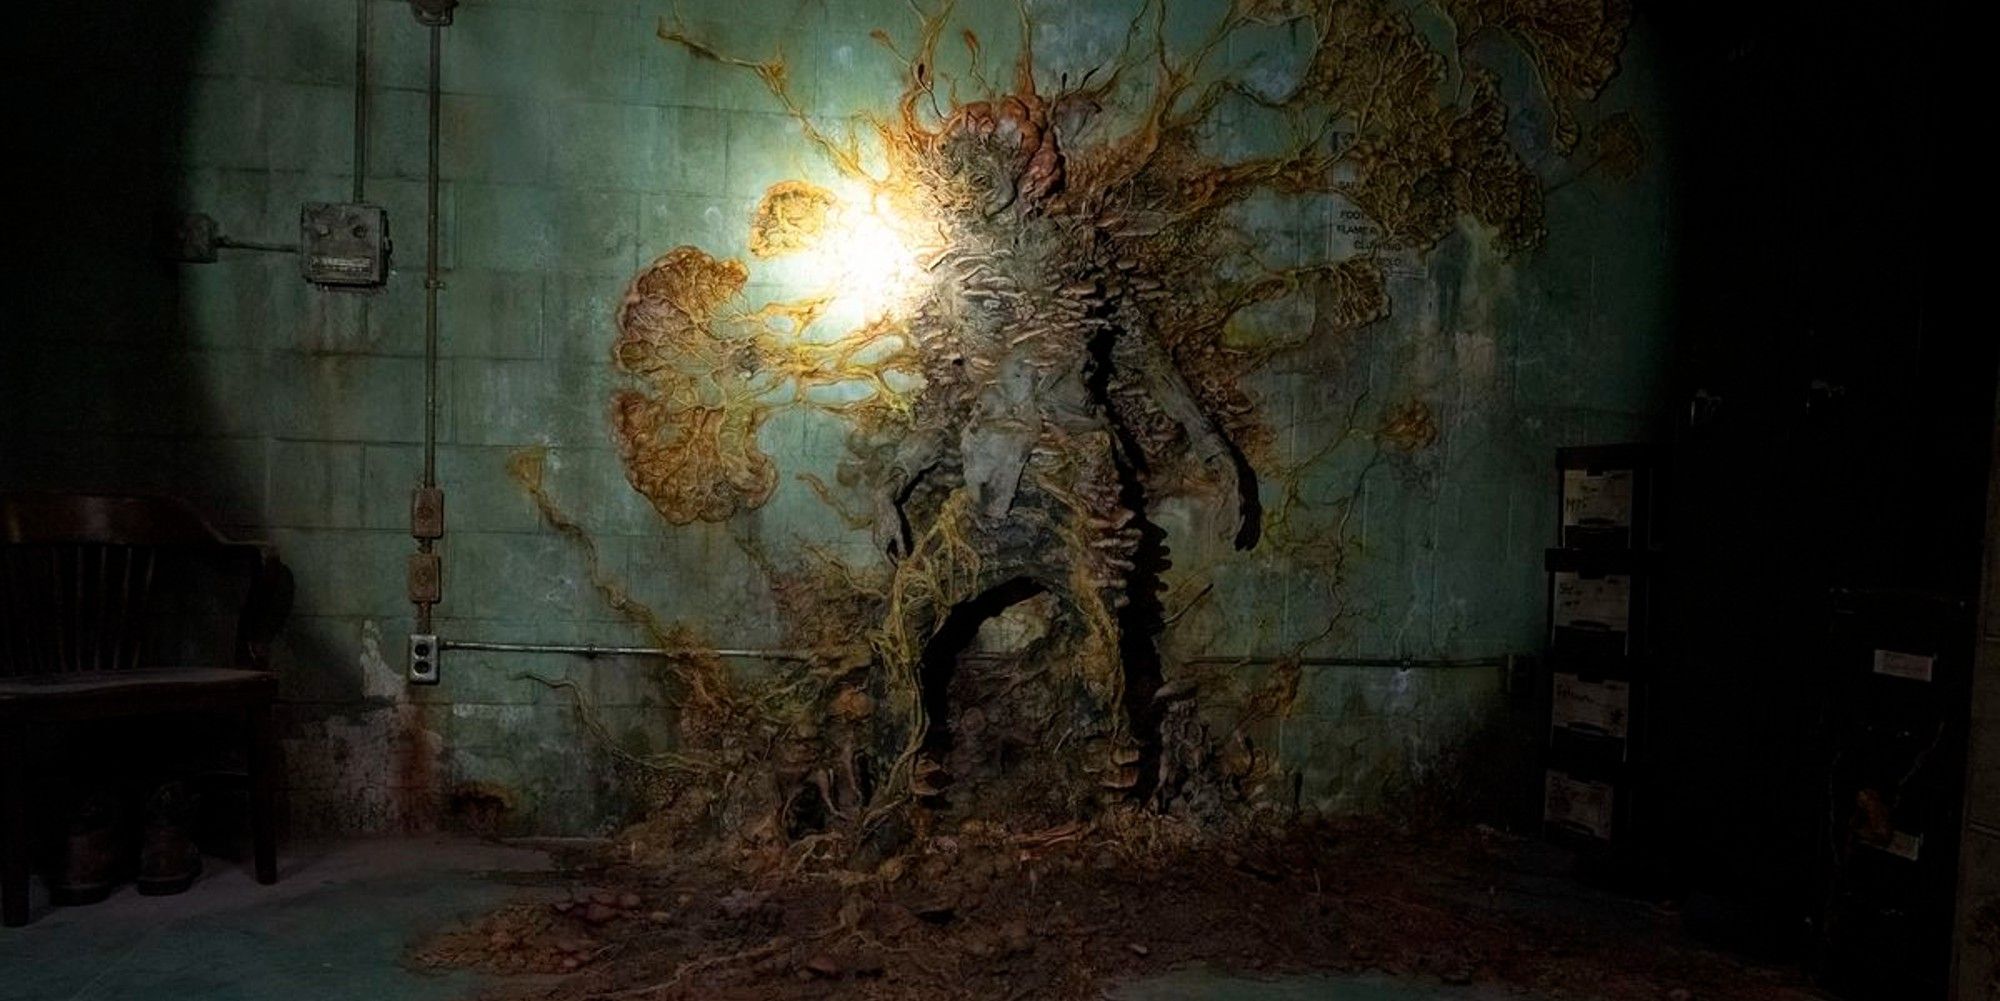 the last of us cordyceps fungus spread over a corpse and a wall